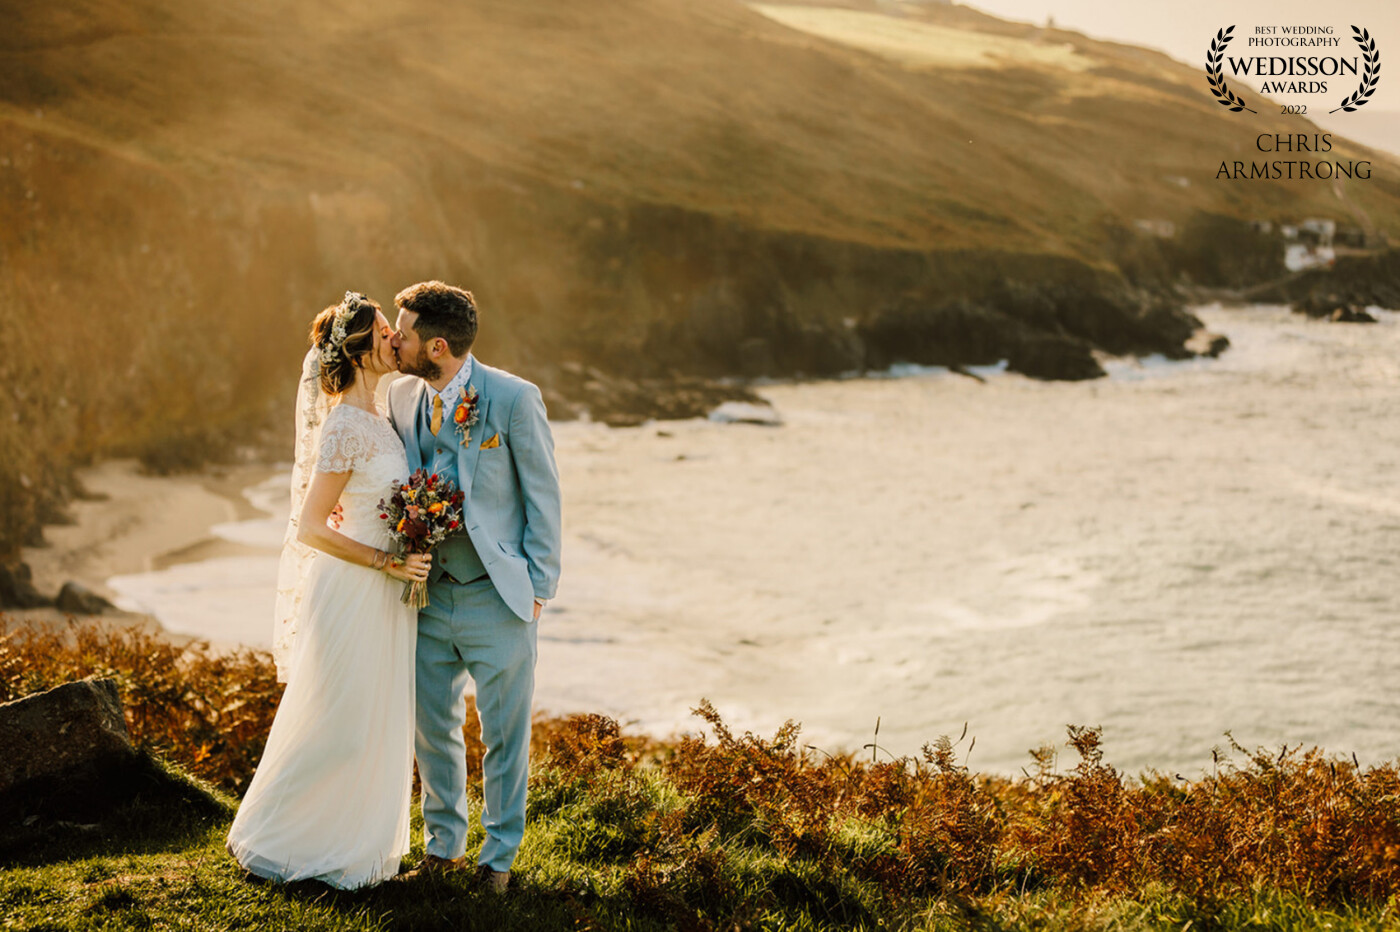 Andy and Maisie chose the Wild West coast of Cornwall for their autumnal wedding day at Chypraze Wedding Barn. There is a beautiful sea cove about. 15 minute downhill walk from the venue, not for the fainthearted especially in a wedding dress! But we (and about 30 guests) embraced the cliffside descent and it was definitely worth it. I love the light and autumnal colours next to the sea!